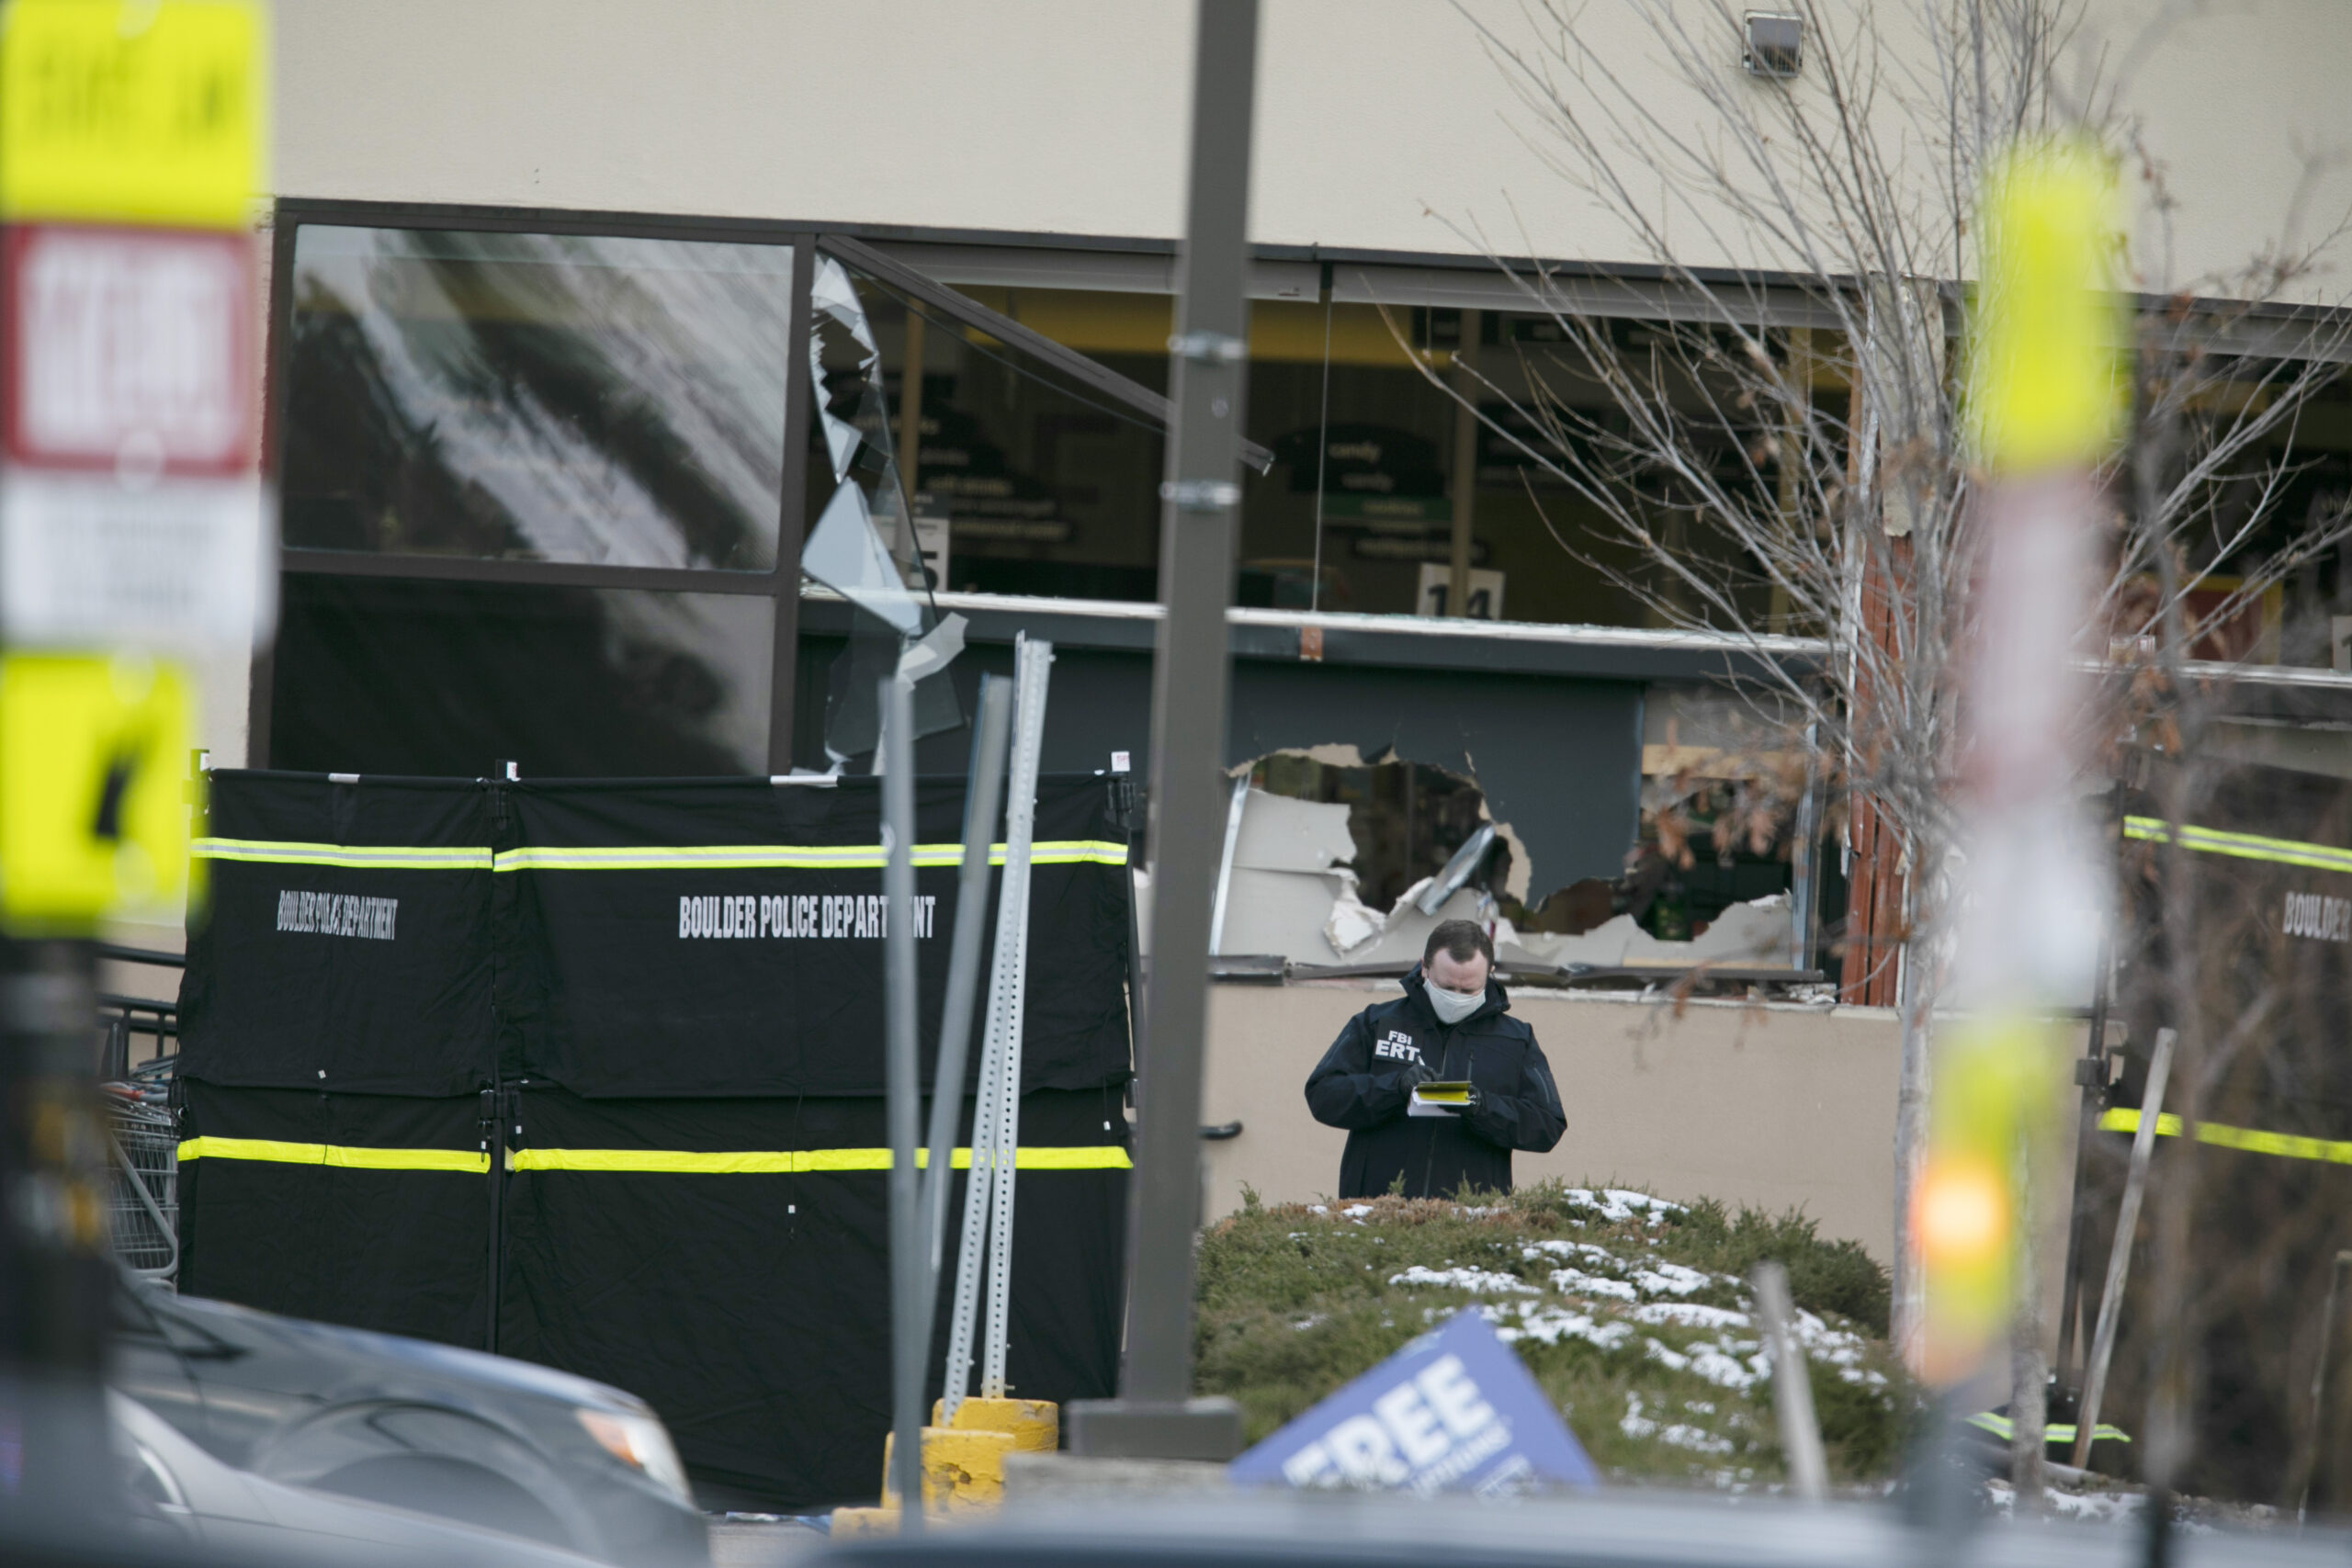 Police work on the scene outside of a King Soopers grocery store where authorities say multiple people were killed in a shooting, Monday, March 22, 2021, in Boulder, Colo.. (AP Photo/Joe Mahoney)